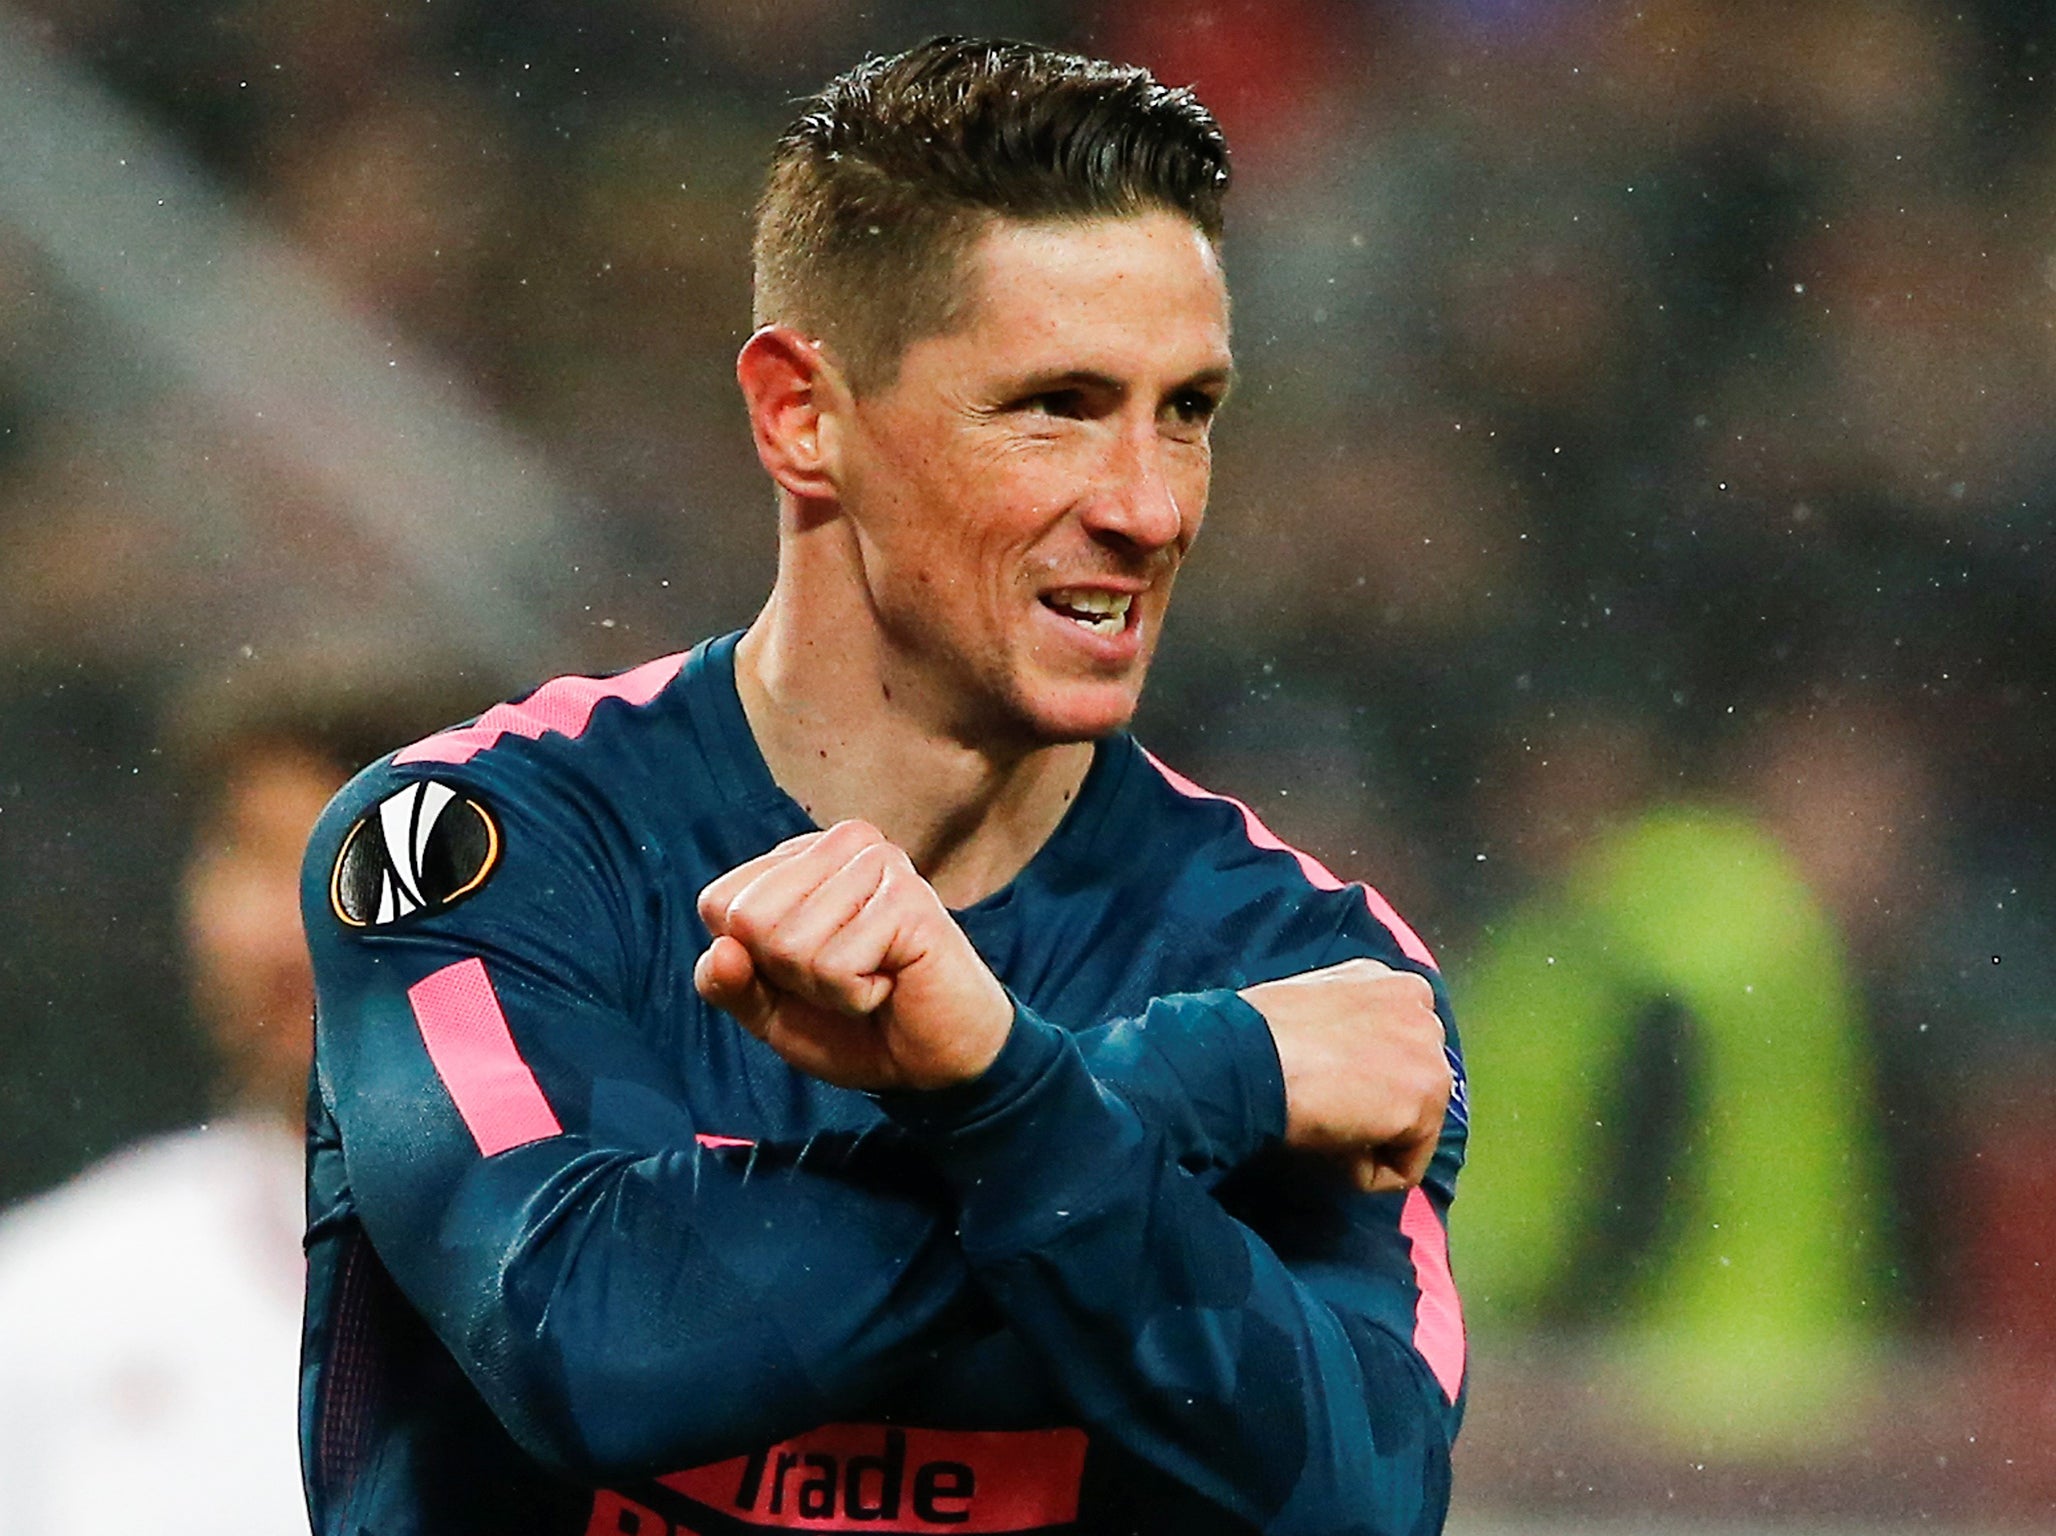 Fernando Torres was the evening's standout performer